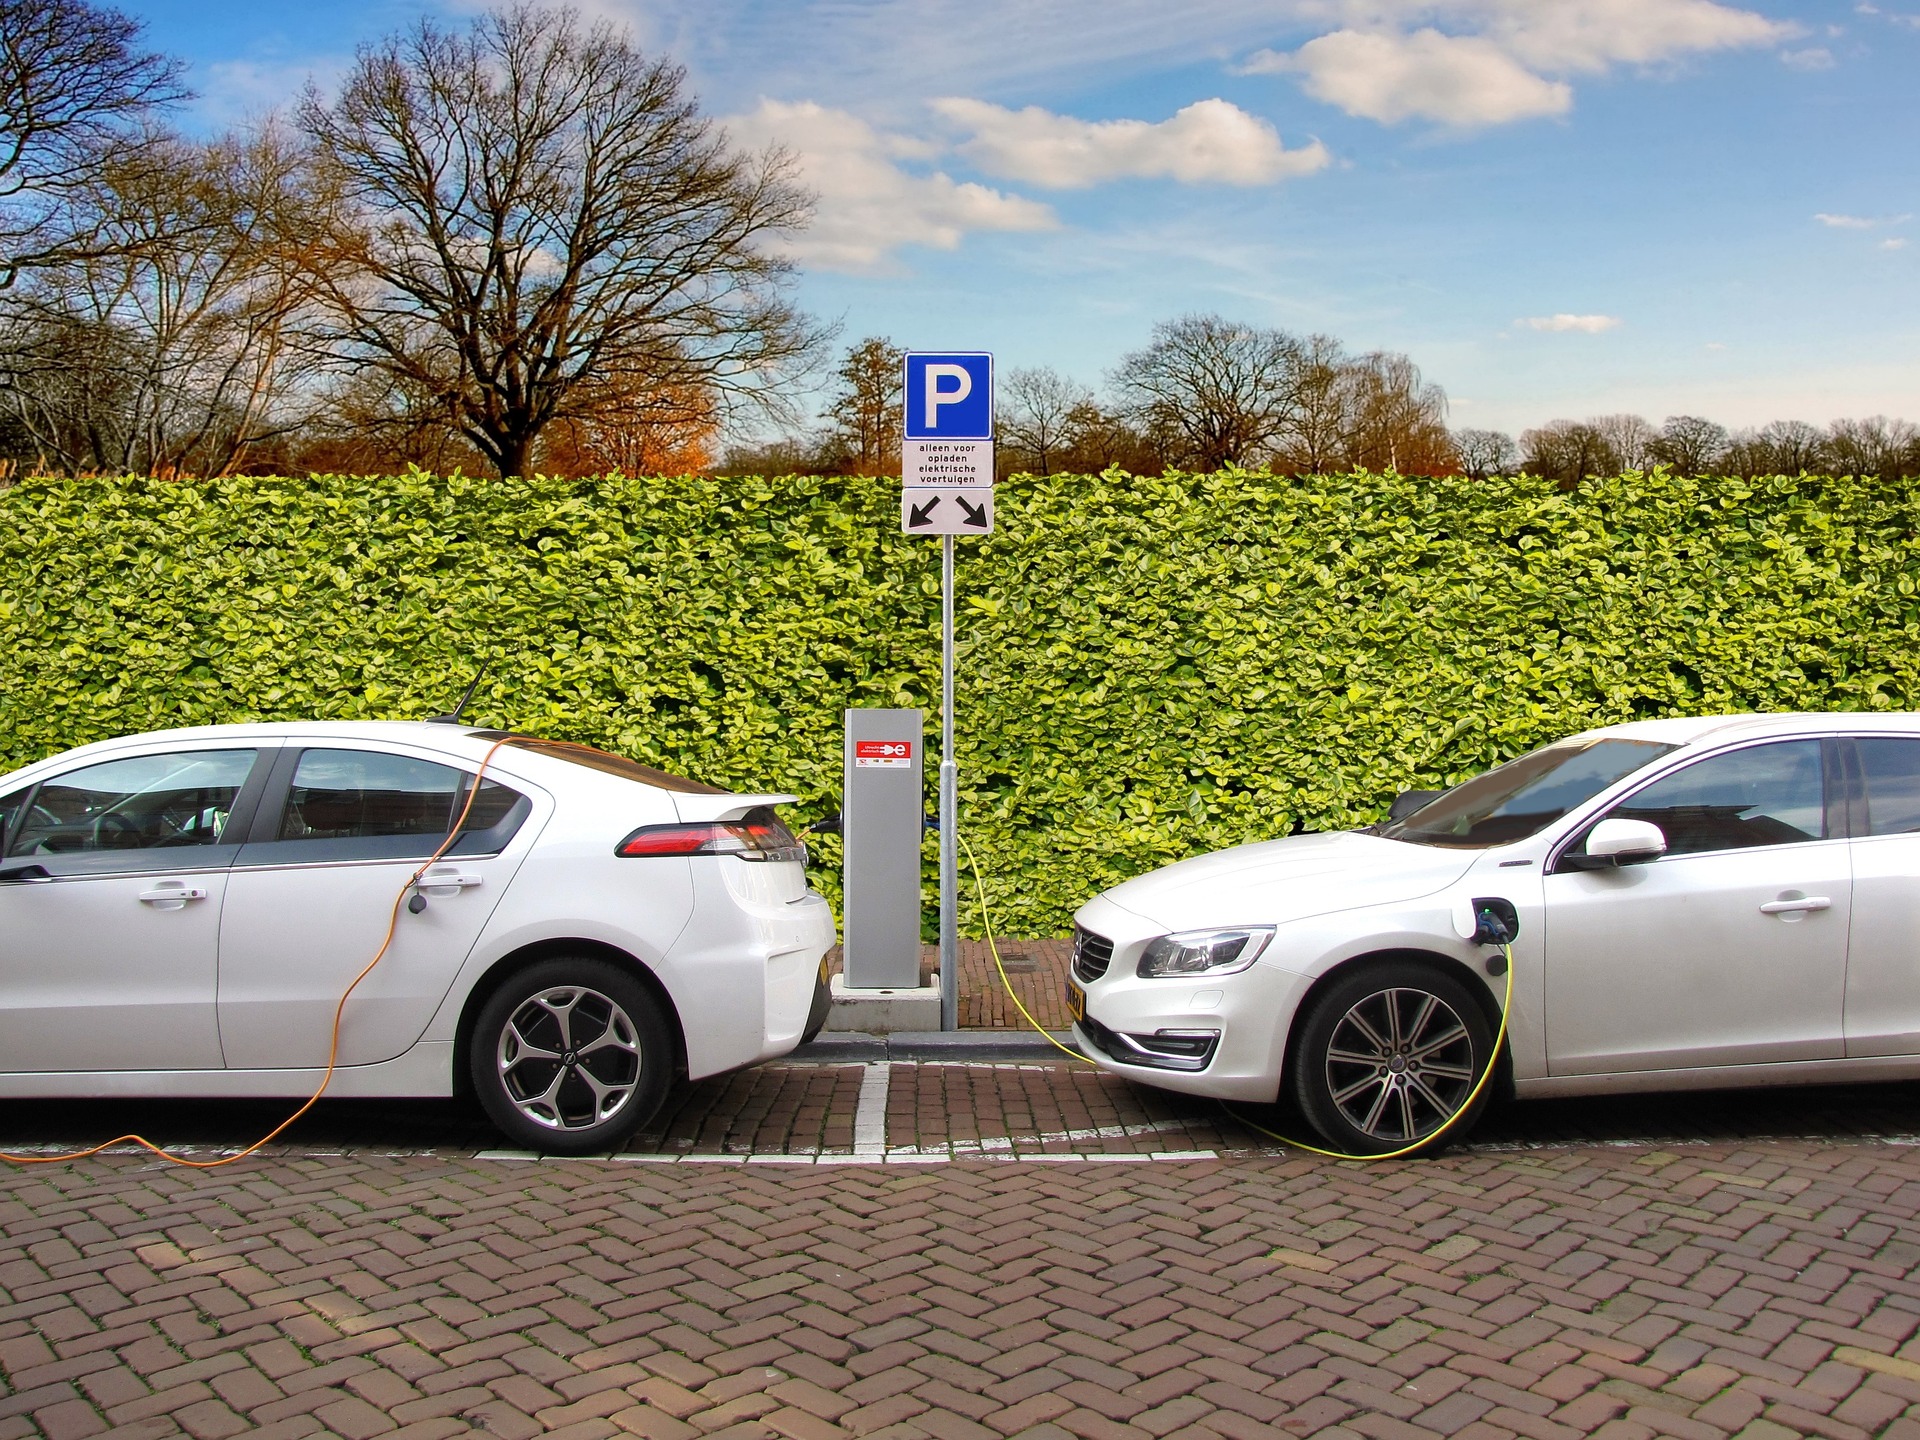 EVs and their acceptance in the Sub-continent